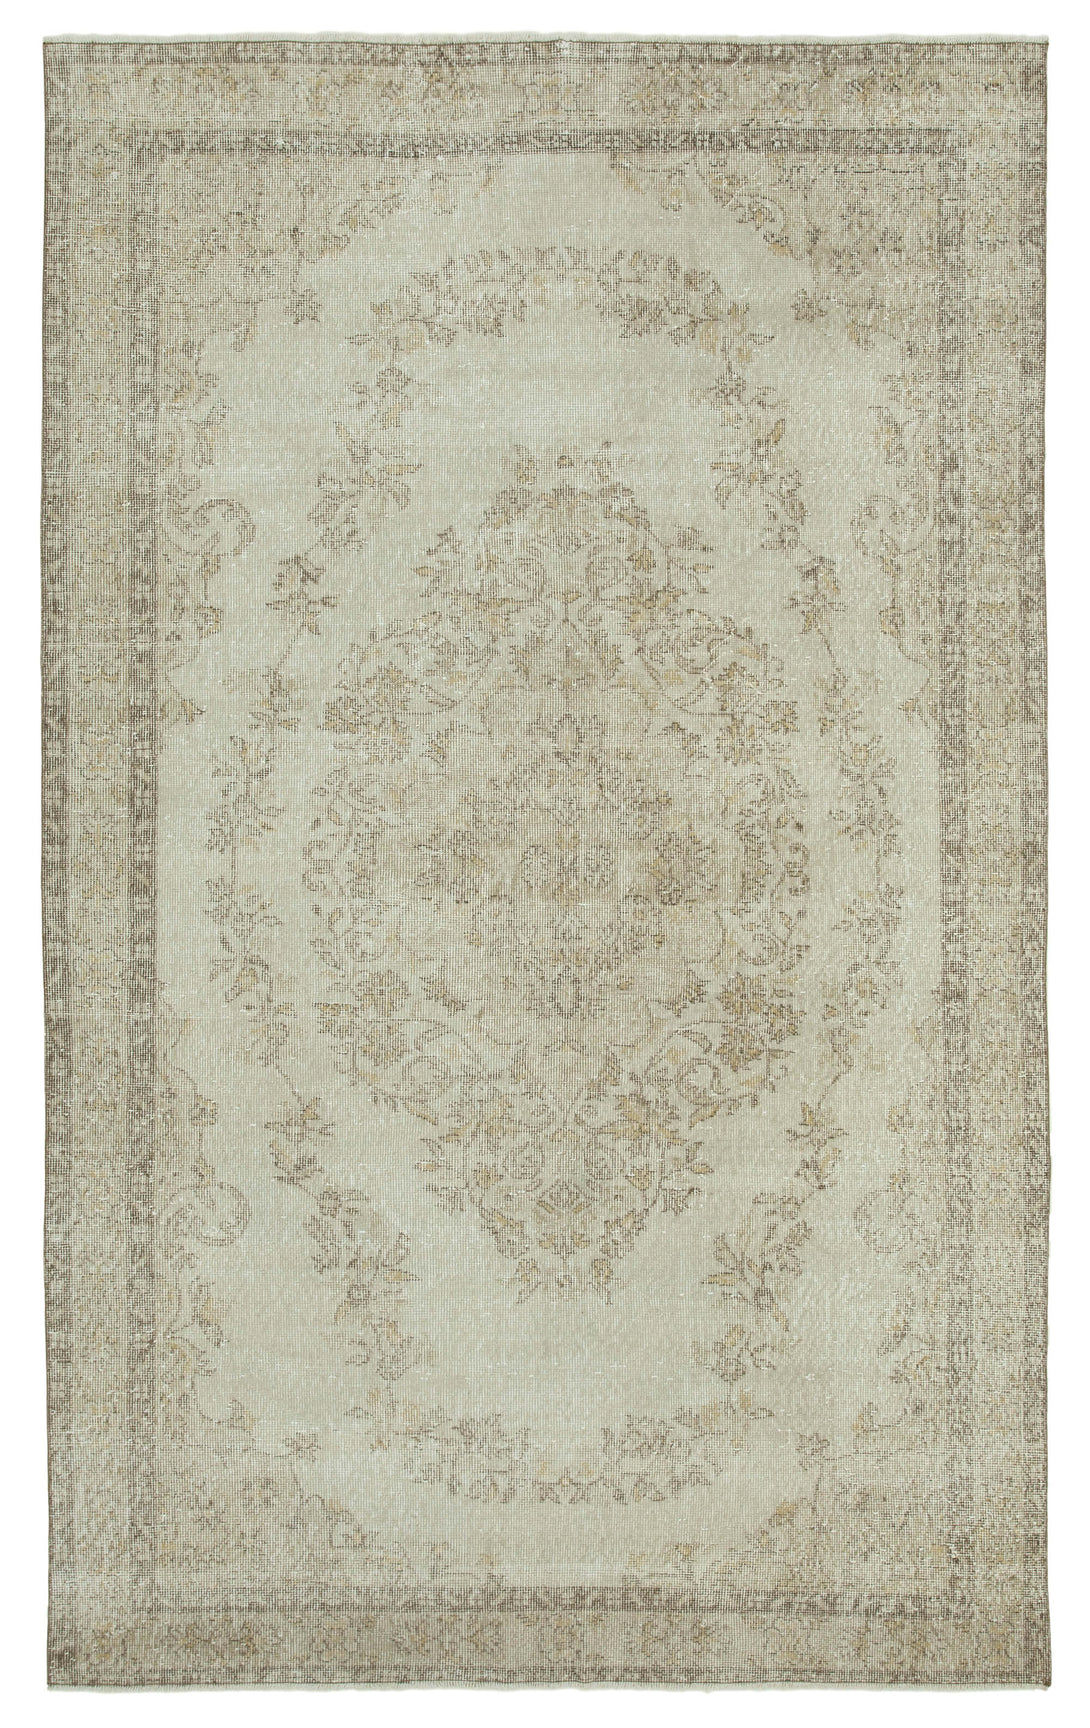 Handmade White Wash Area Rug > Design# OL-AC-36637 > Size: 6'-2" x 10'-1", Carpet Culture Rugs, Handmade Rugs, NYC Rugs, New Rugs, Shop Rugs, Rug Store, Outlet Rugs, SoHo Rugs, Rugs in USA